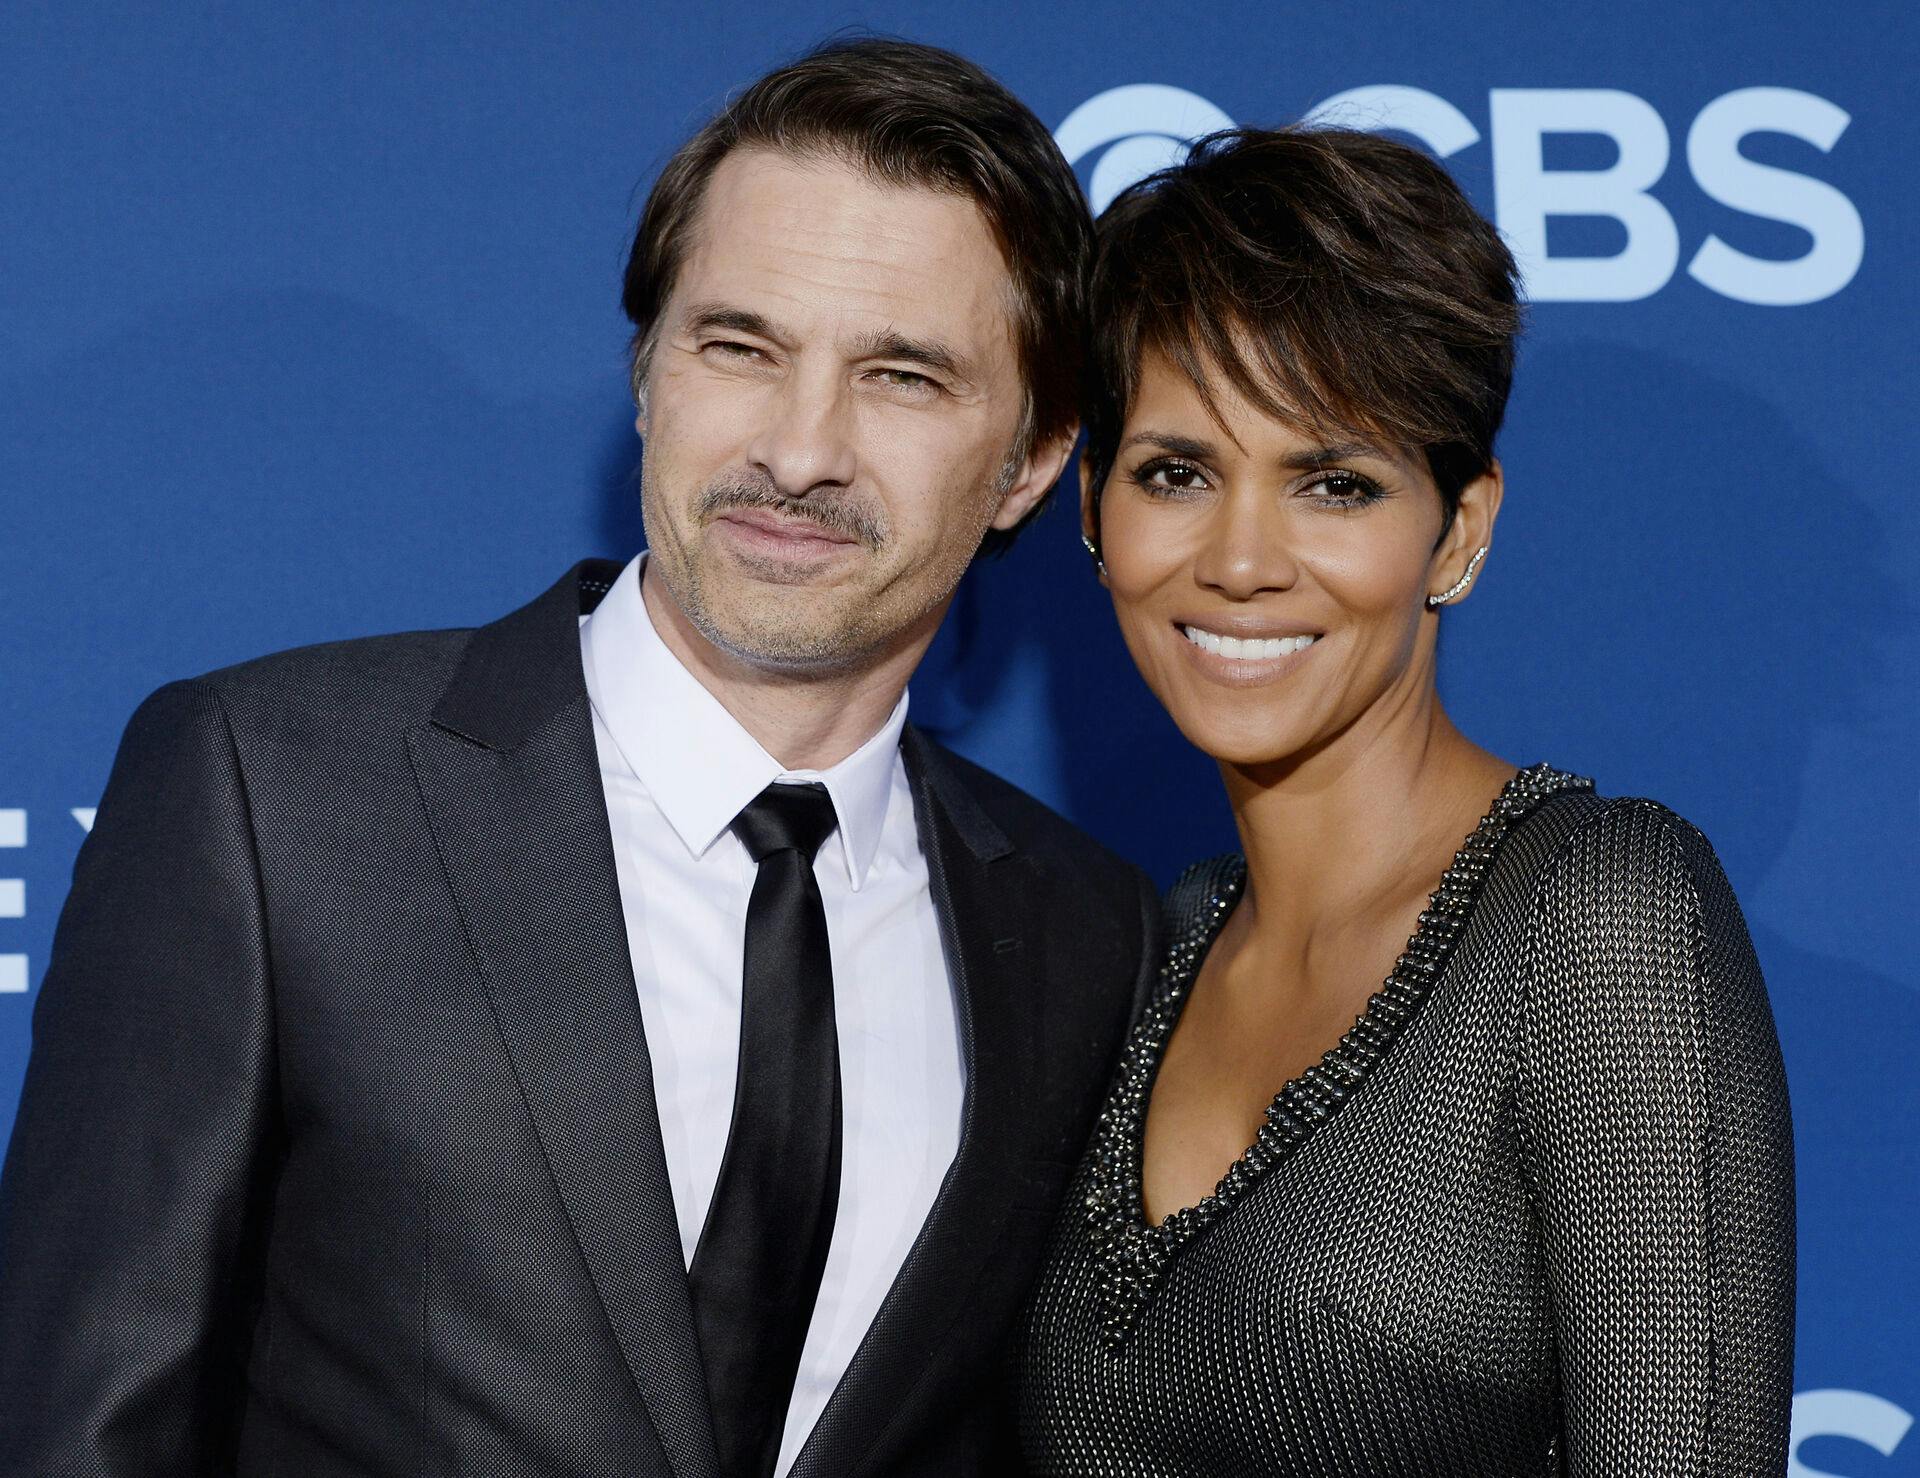 Halle Berry of the CBS science fiction television series "Extant, " poses with her husband Olivier Martinez during the premiere of the series in Los Angeles, California in this June 16, 2014 file photo. Martinez is under investigation for potential battery after he reportedly shoved a Los Angeles airport employee who may have been taking pictures of him. REUTERS/Kevork Djansezian/Files (UNITED STATES - Tags: ENTERTAINMENT)